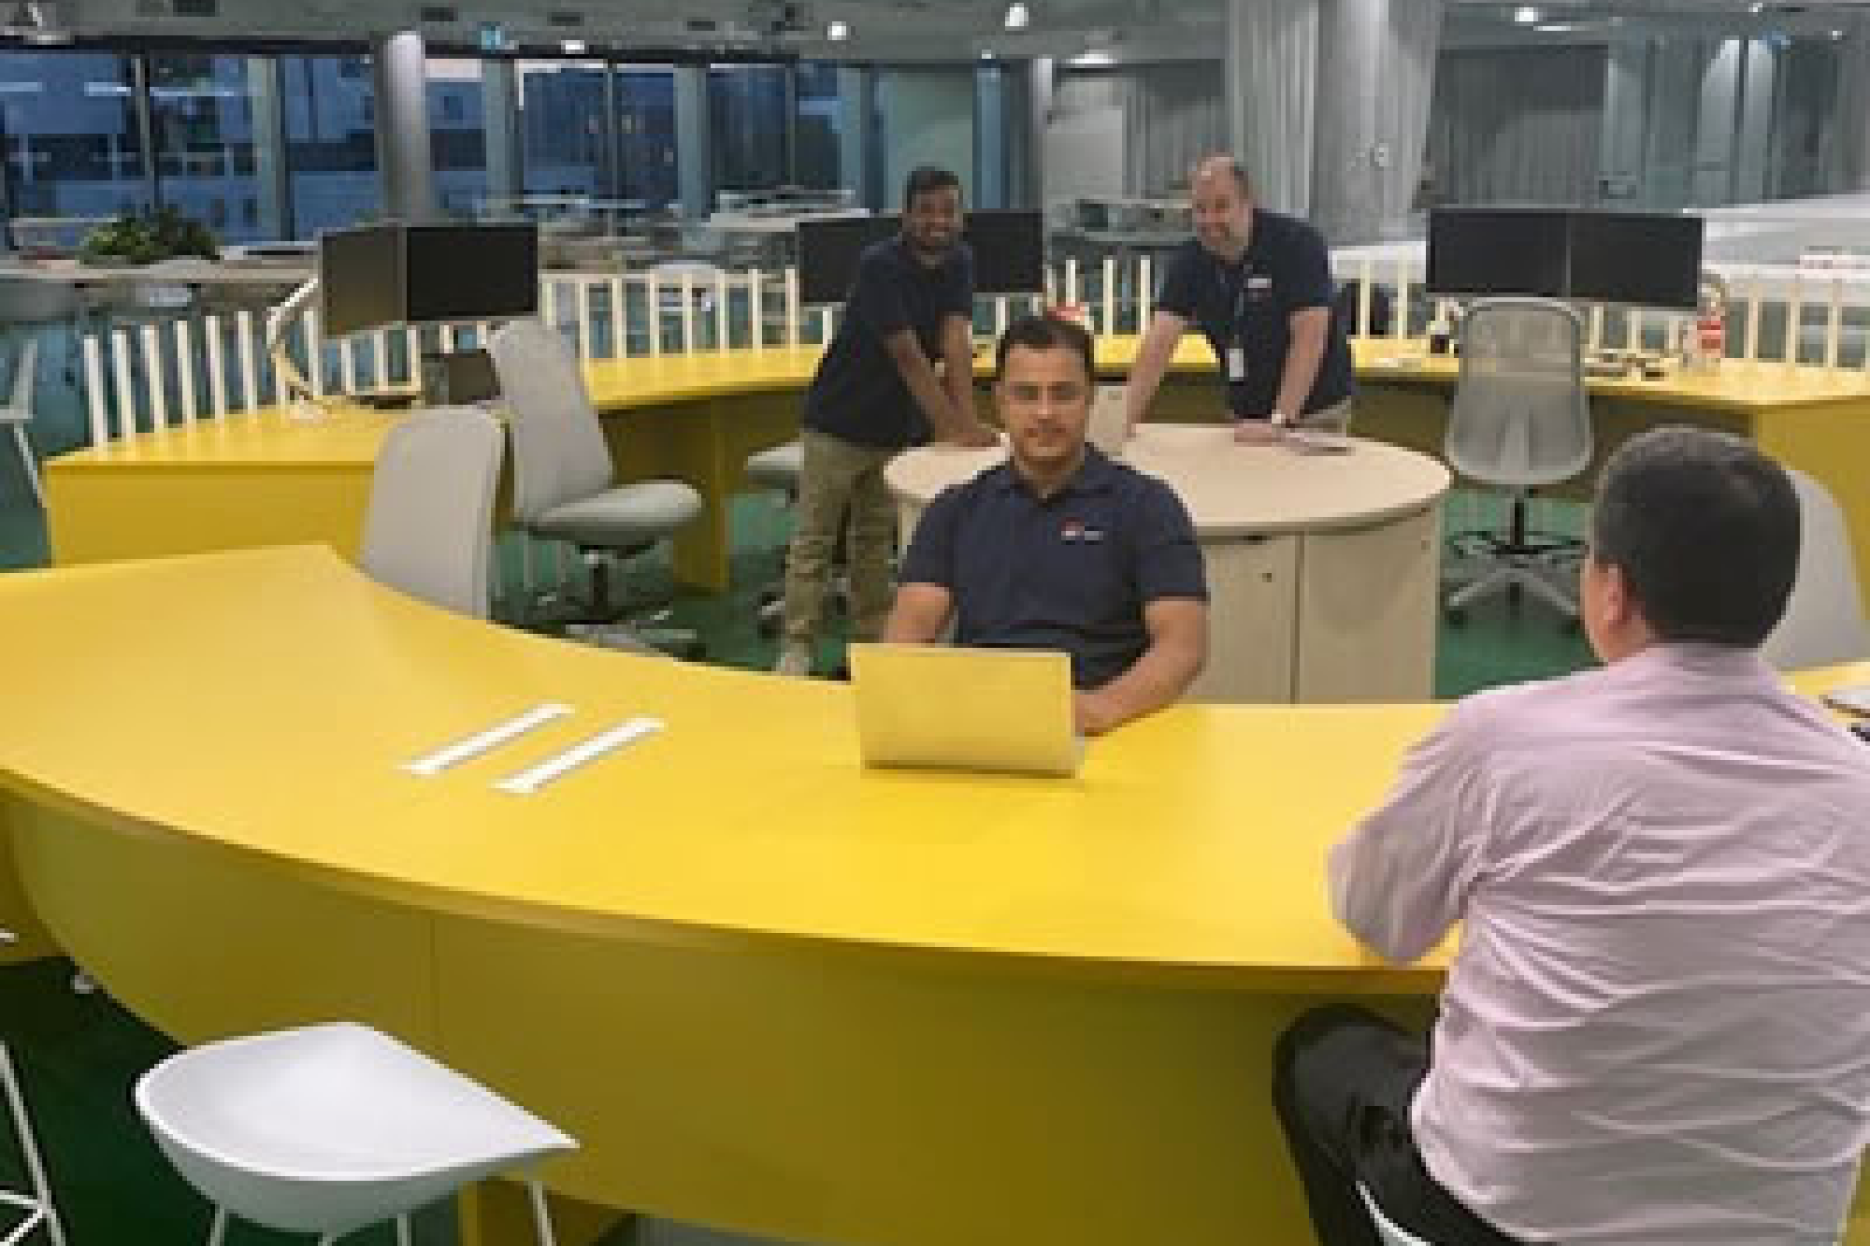 Abilash Rao Vavilala, Yaseen Syed and Graeme Burt provide IT support to one of the Connect IT Hub’s first customers at 1 Reserve Road